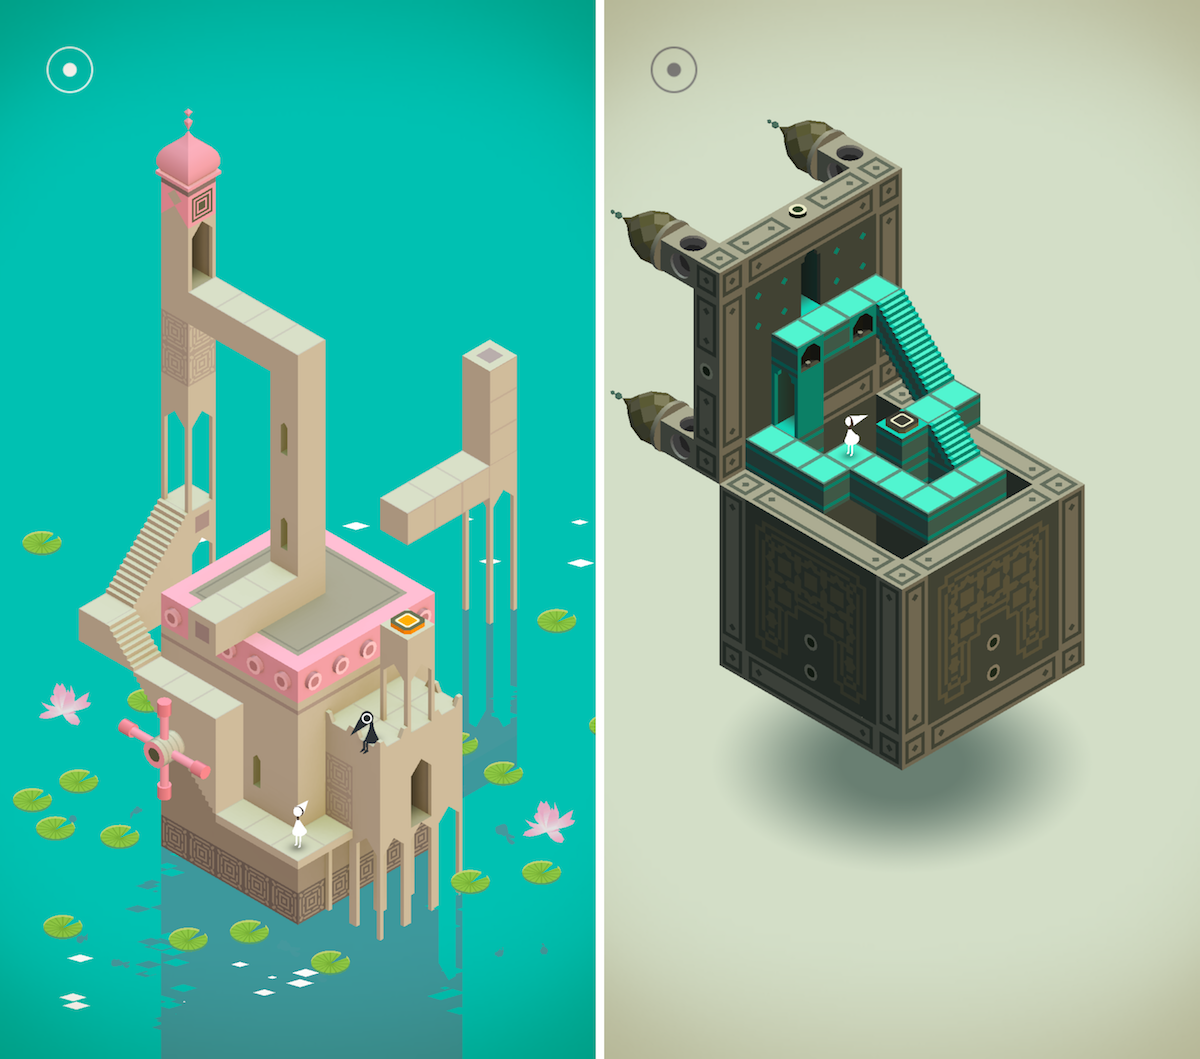 Monument Valley (£2.49)